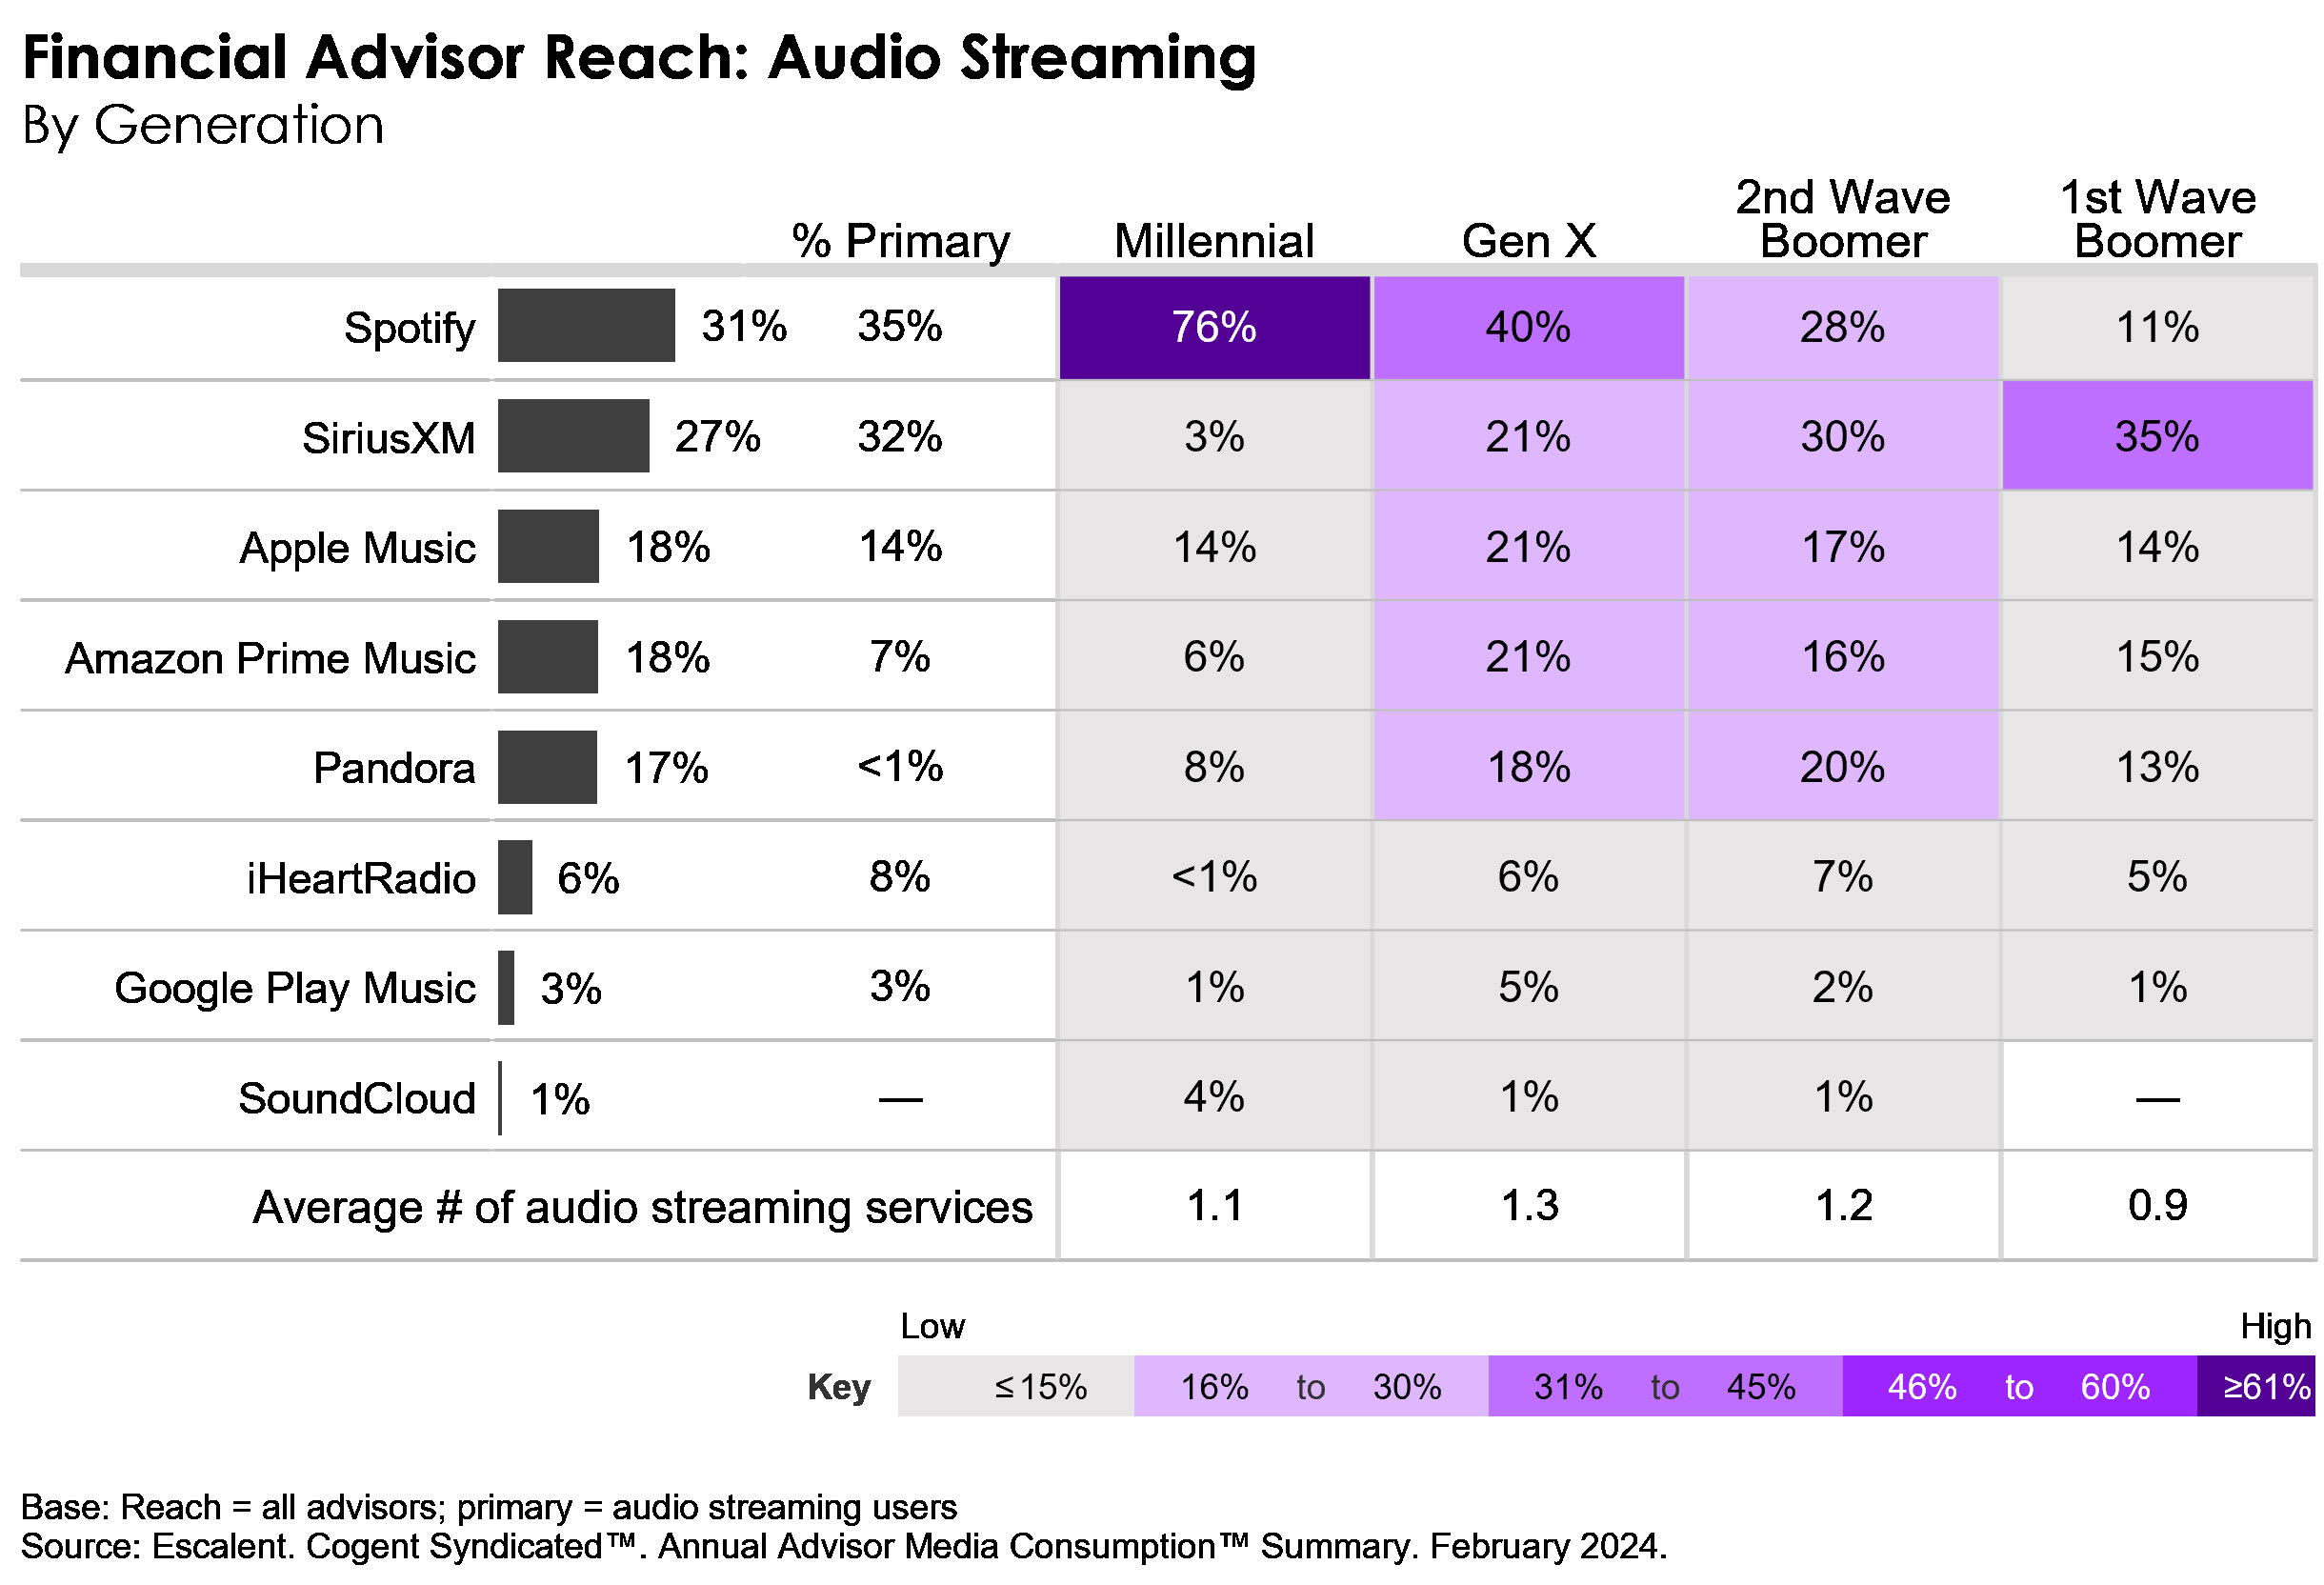 A table depicting the reach of audio streaming services among financial advisors by generation.